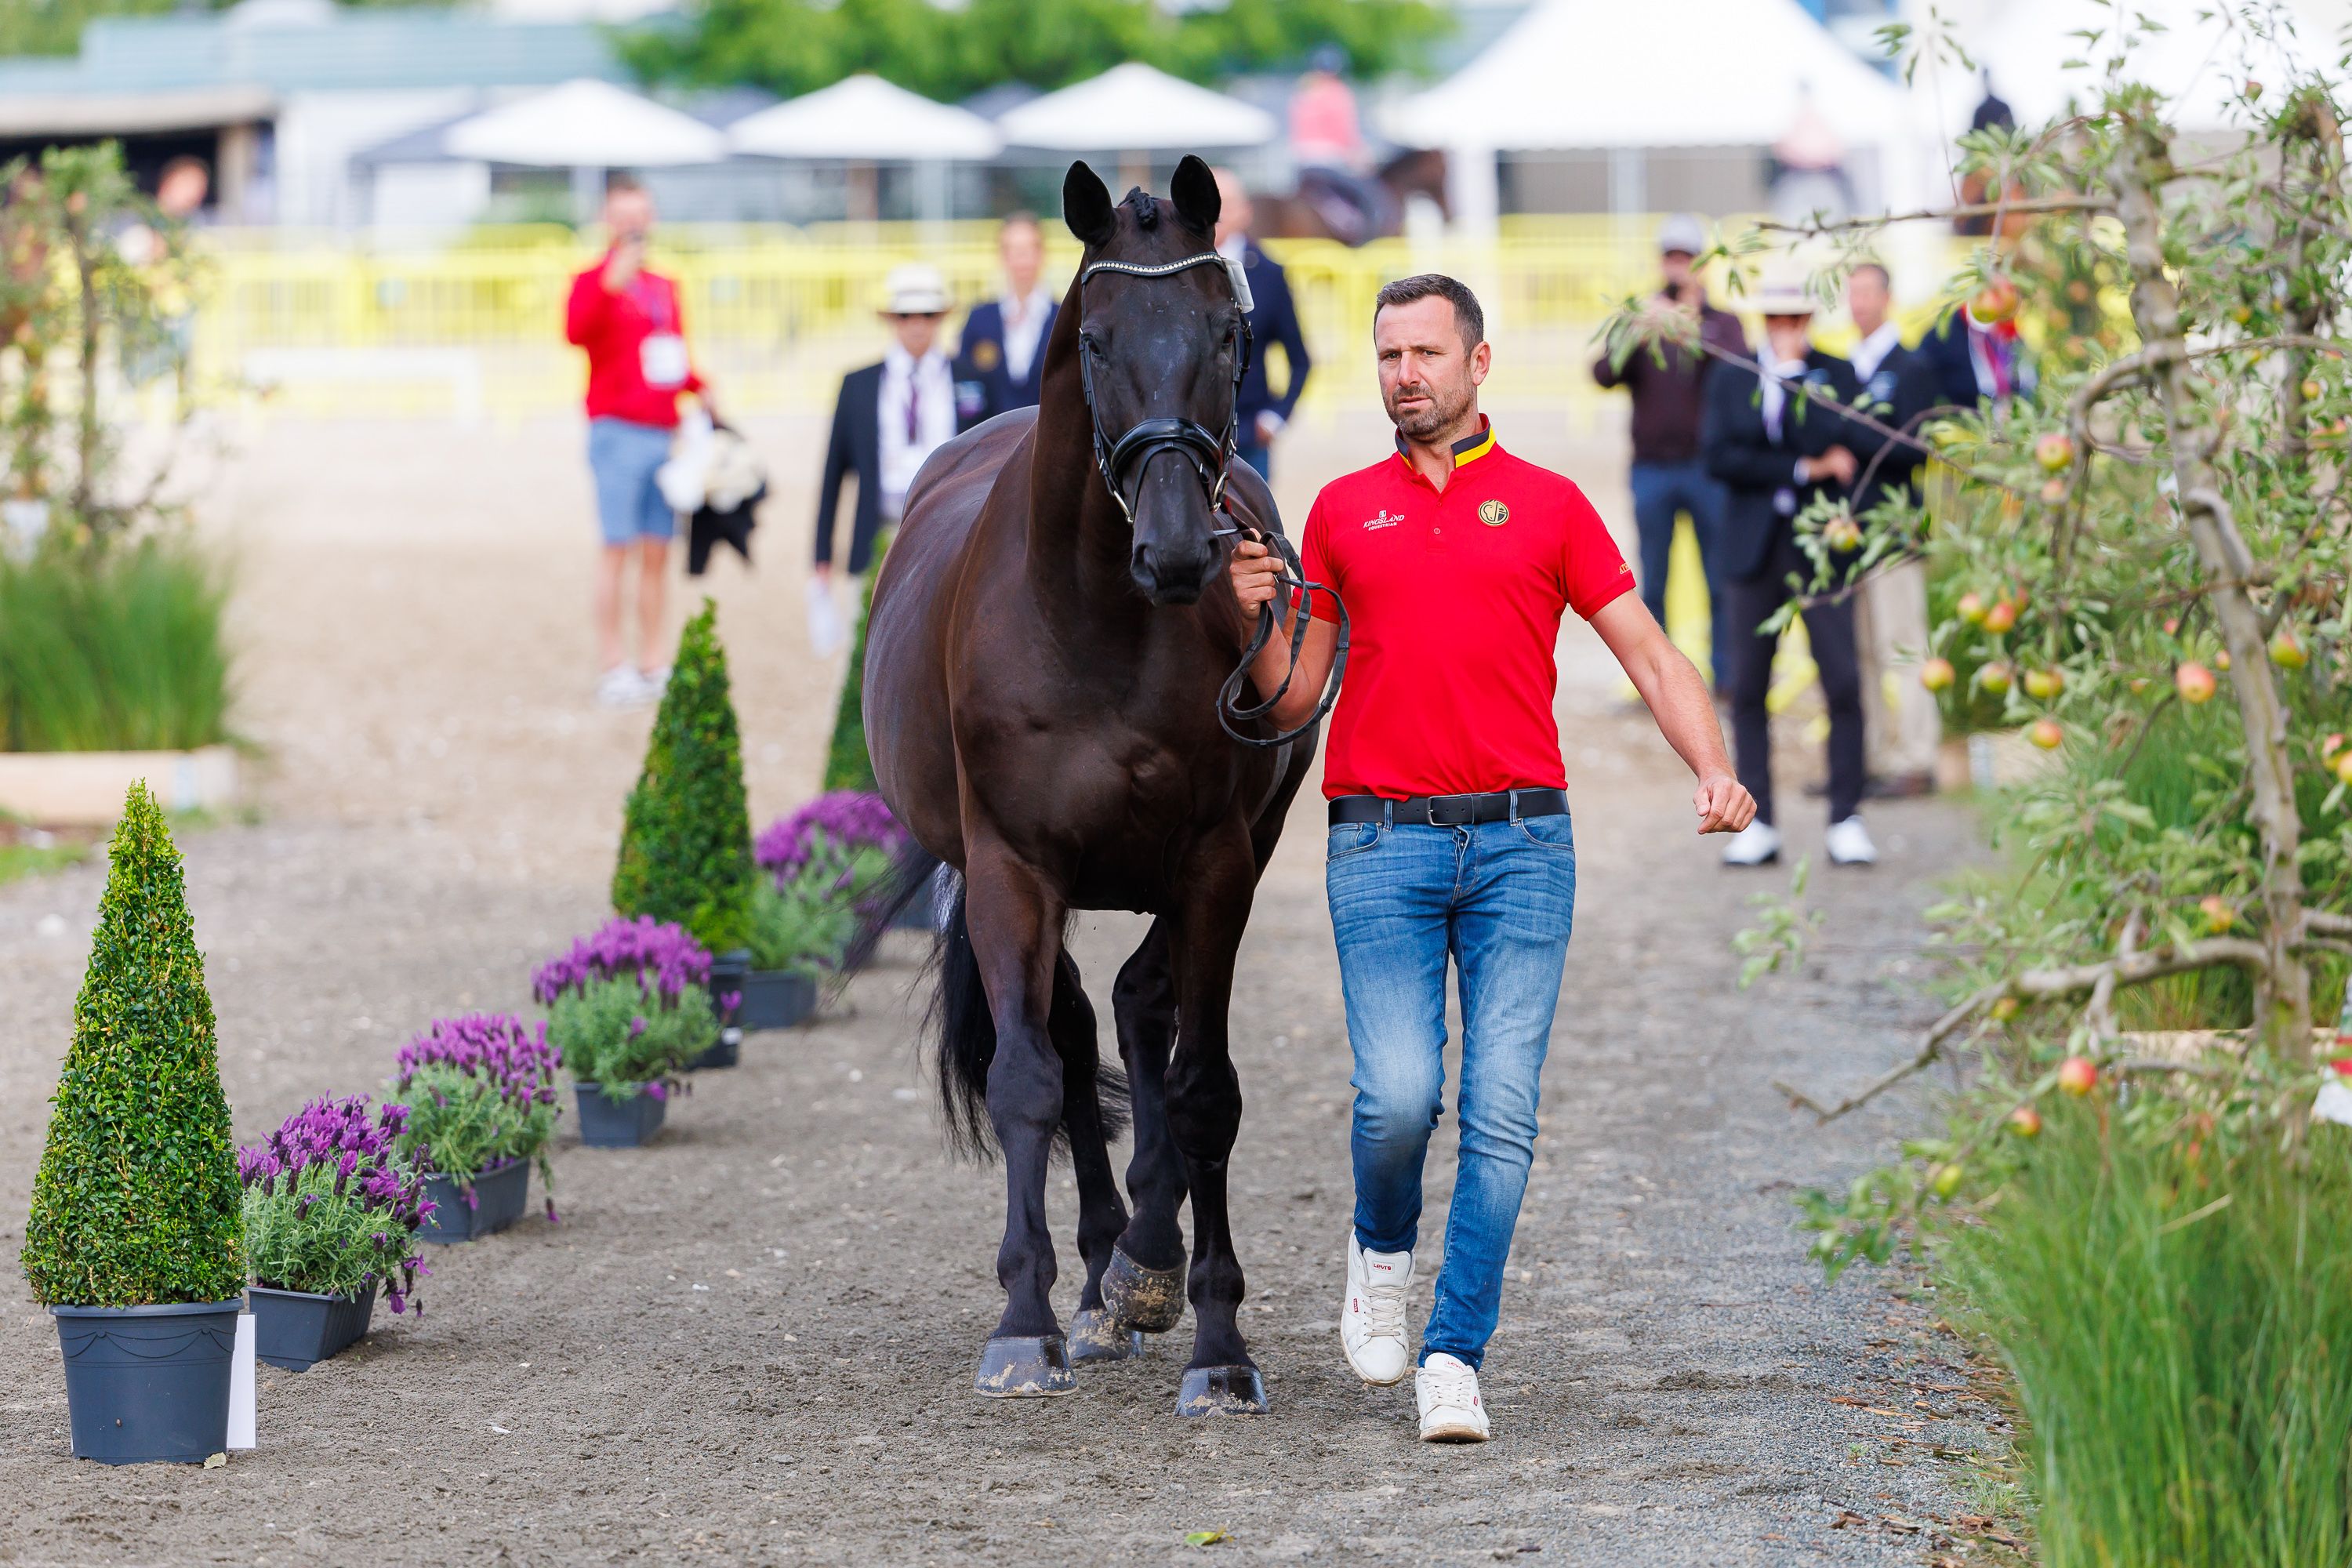 All dressage horses accepted at the ECCO FEI World Championships